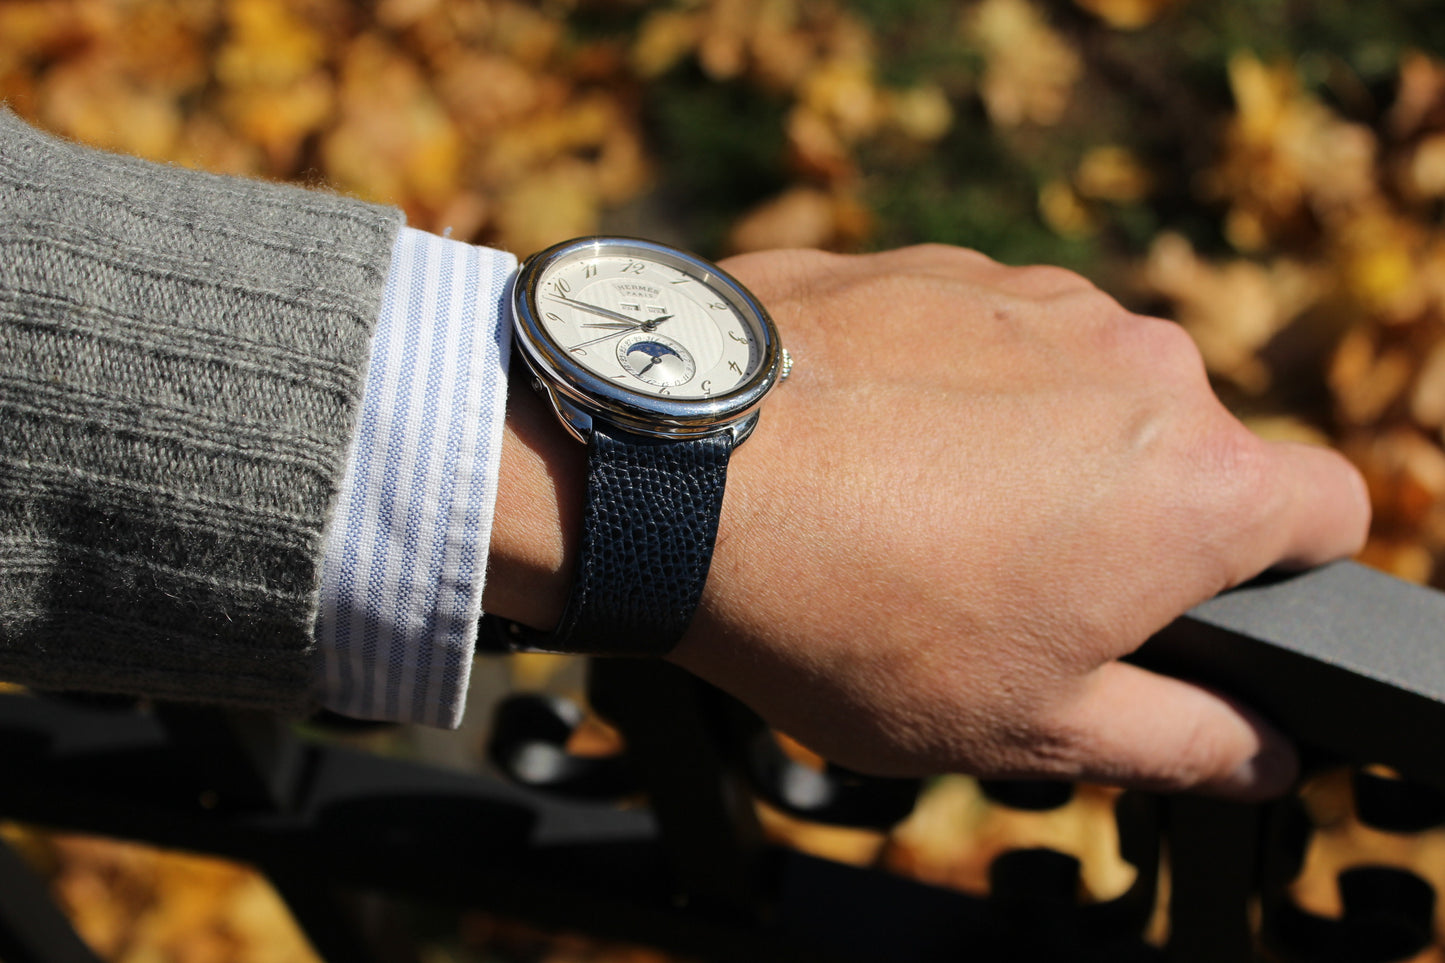 The Cognewaugh Watch Strap in Navy